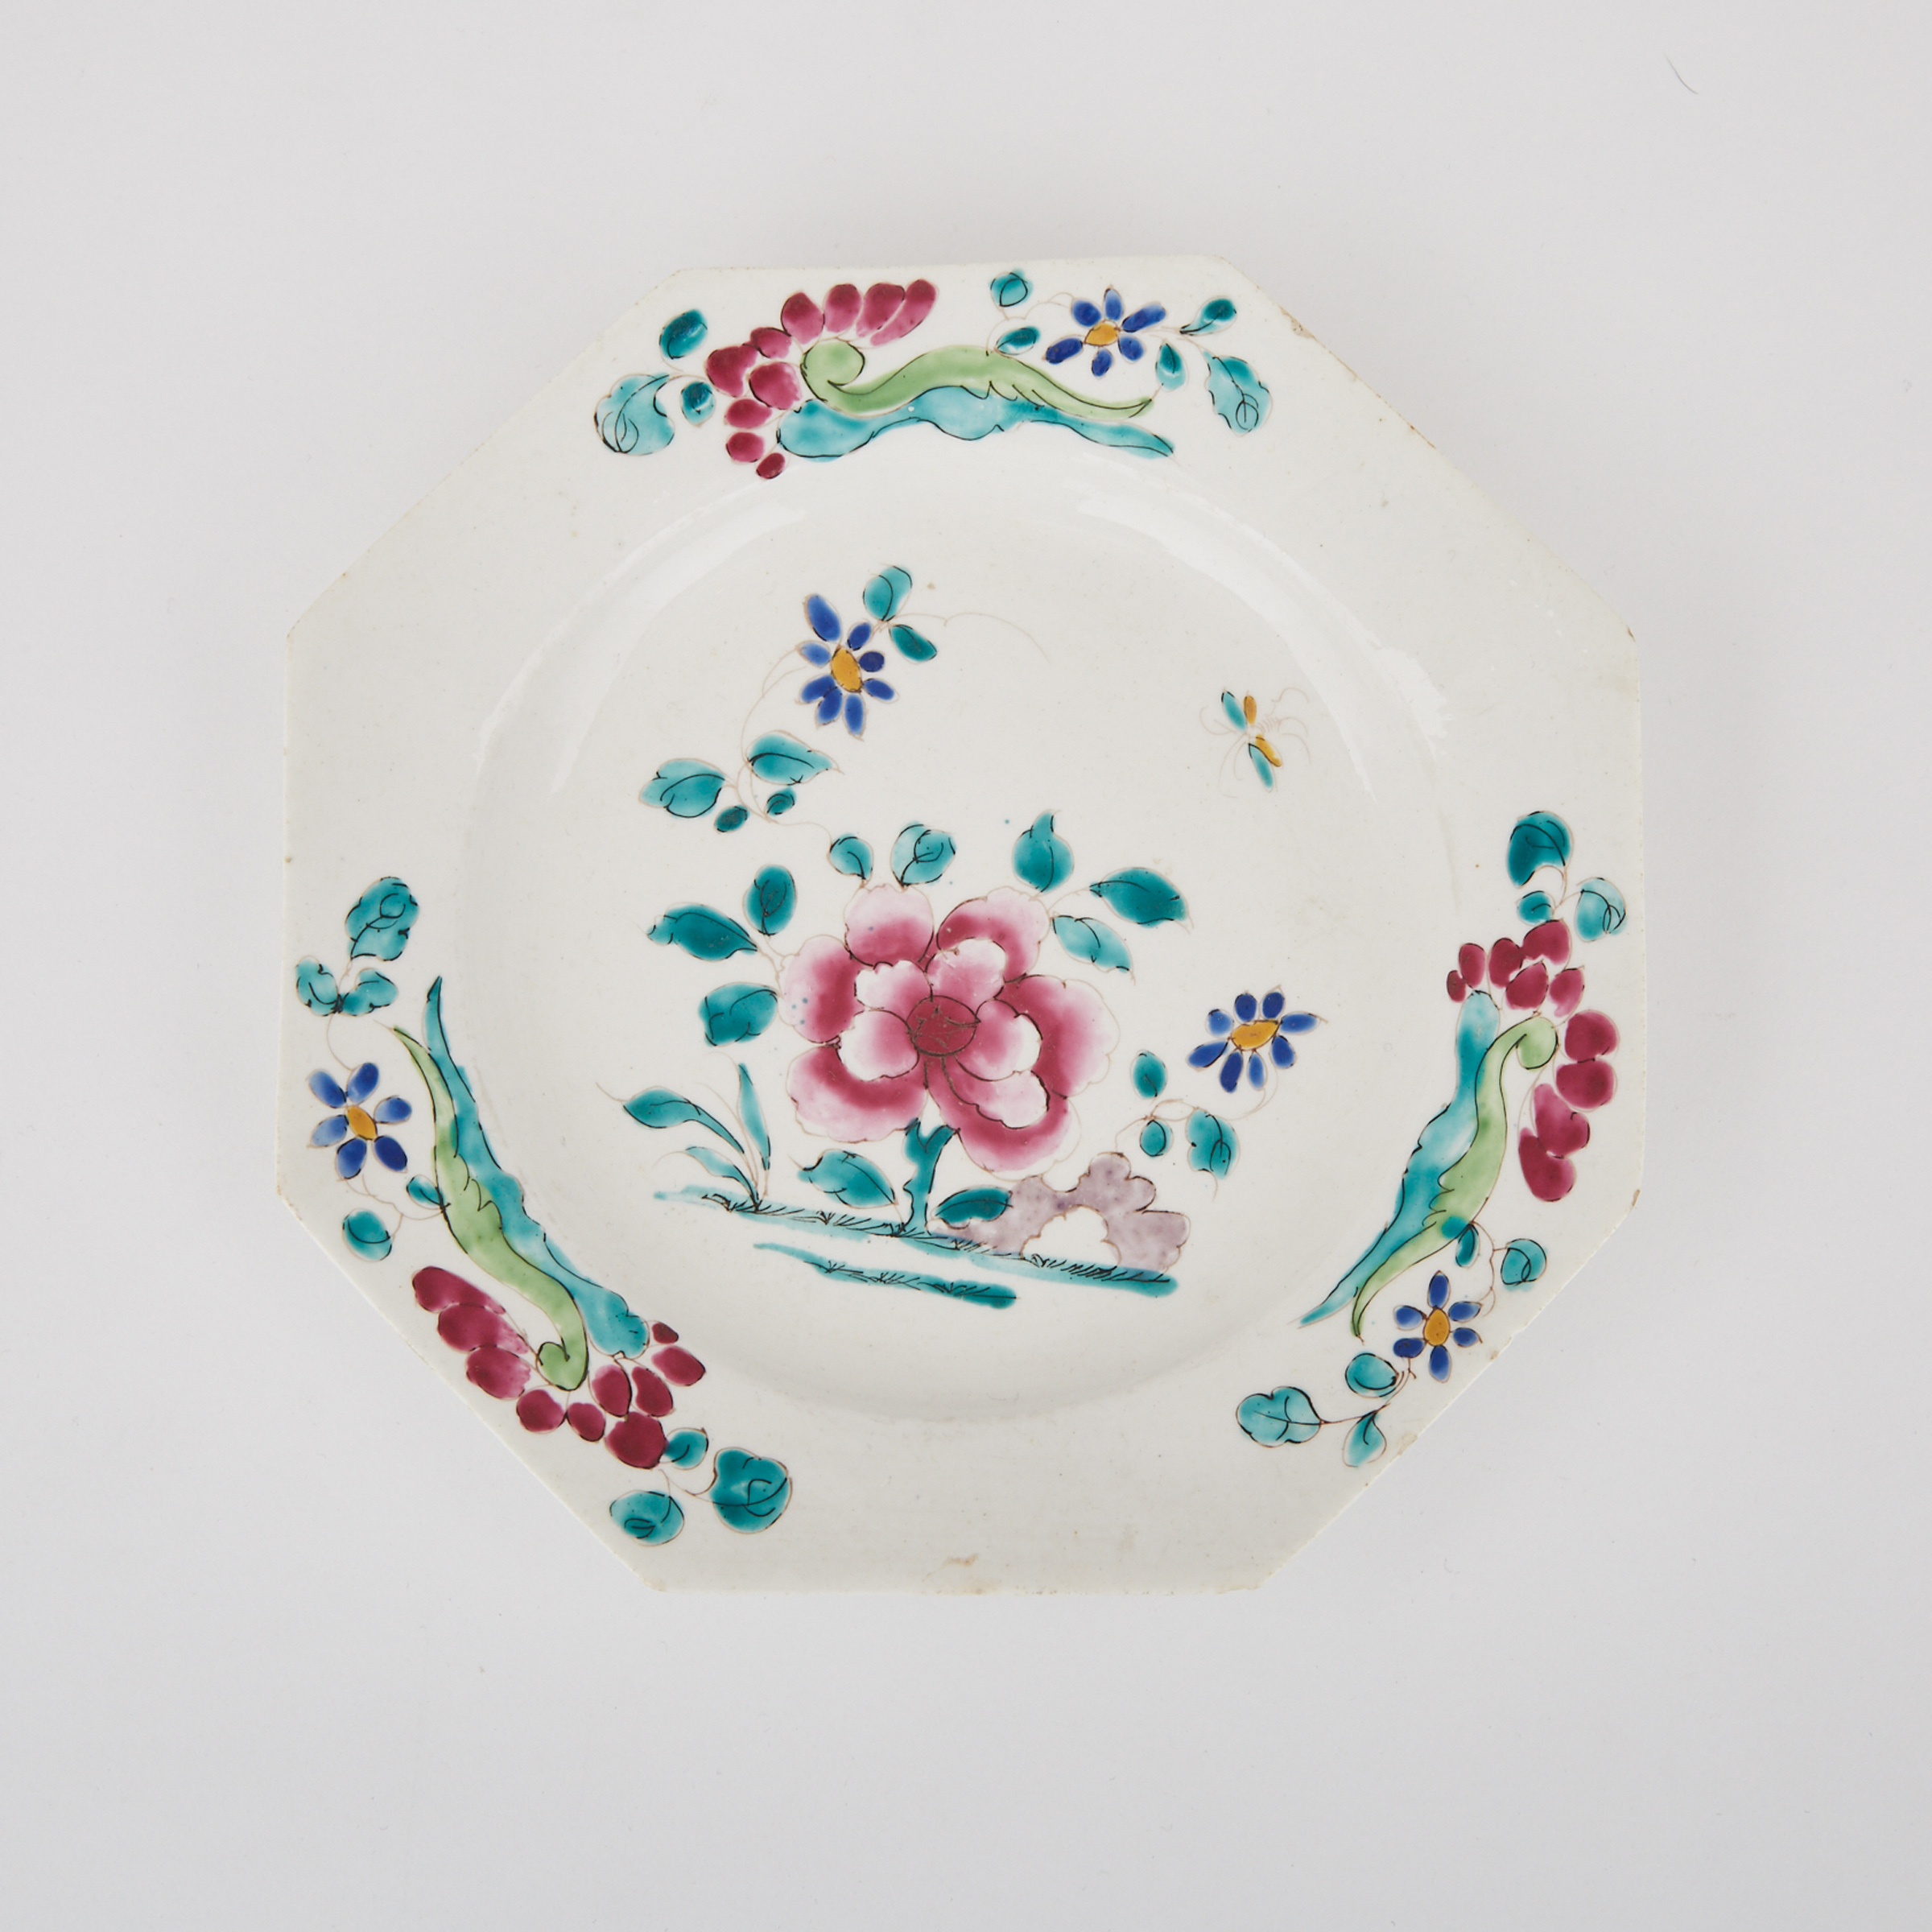 Bow ‘Famille Rose’ Octagonal Plate, c.1758-60